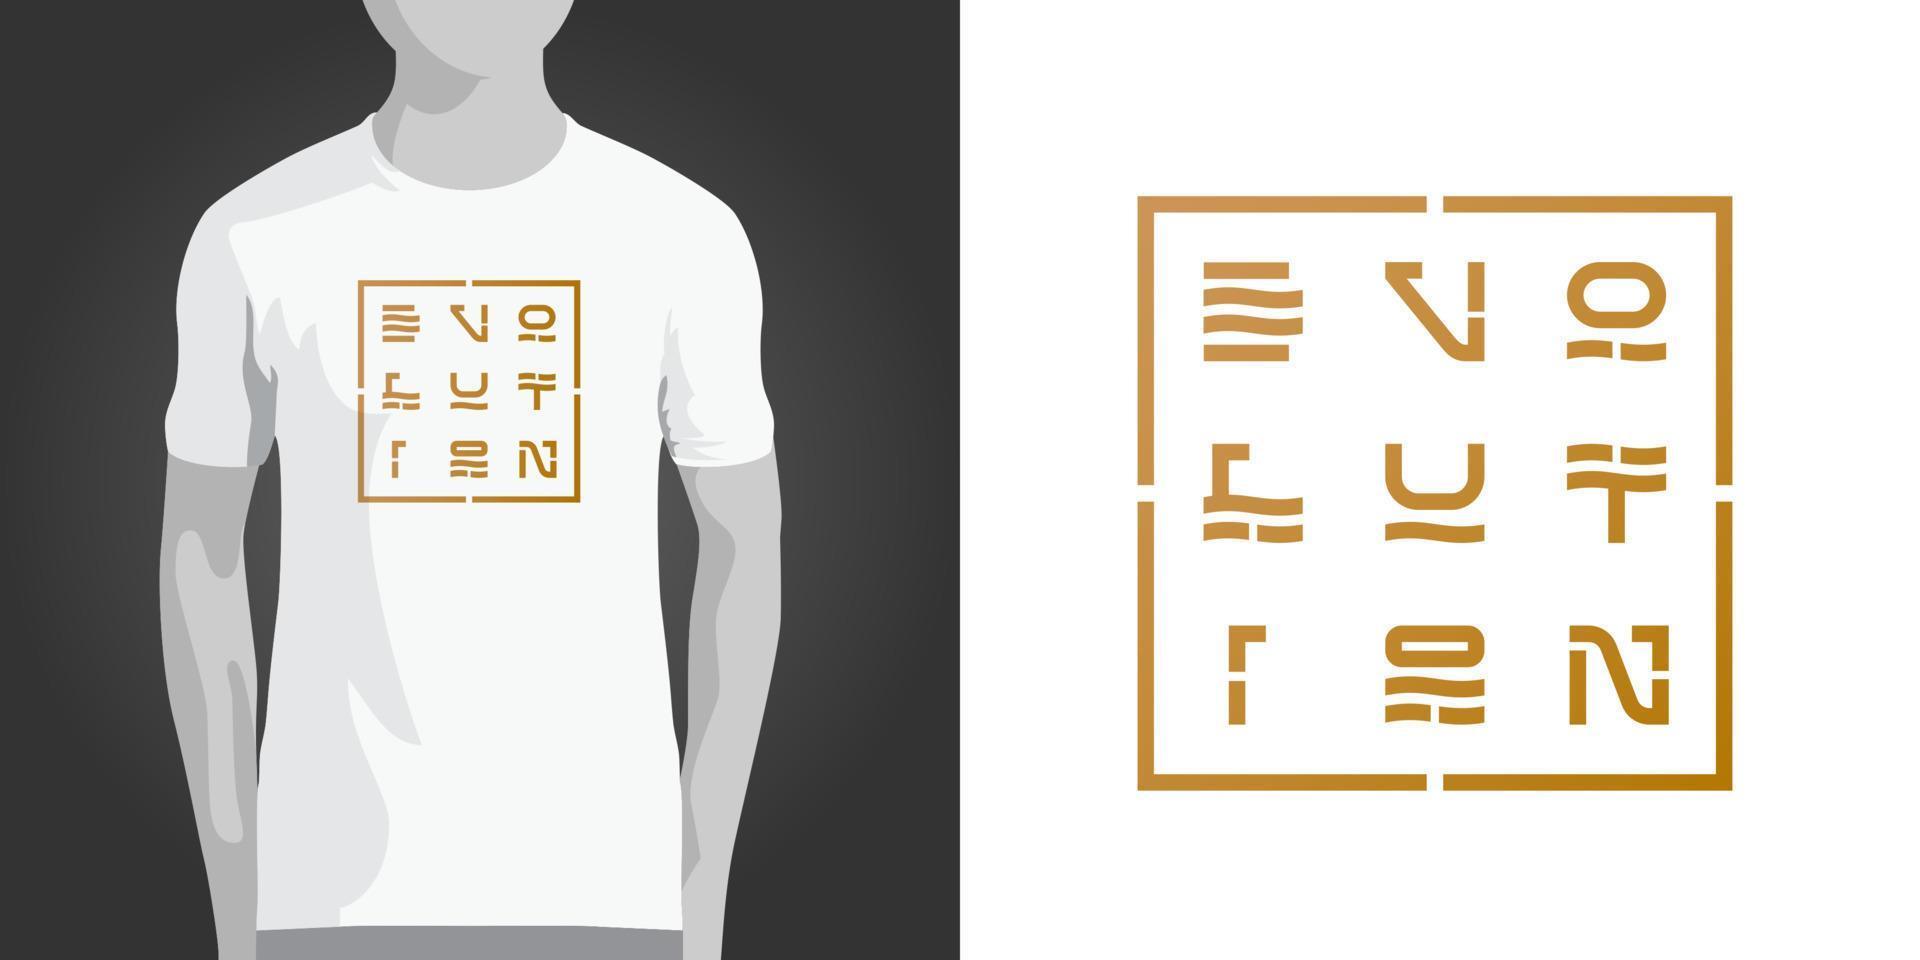 Conceptual inscription Evolution. Print design with typography for men or women T-shirt. Golden lettering in shape of square. Can be used as logo for your company. Vector illustration.